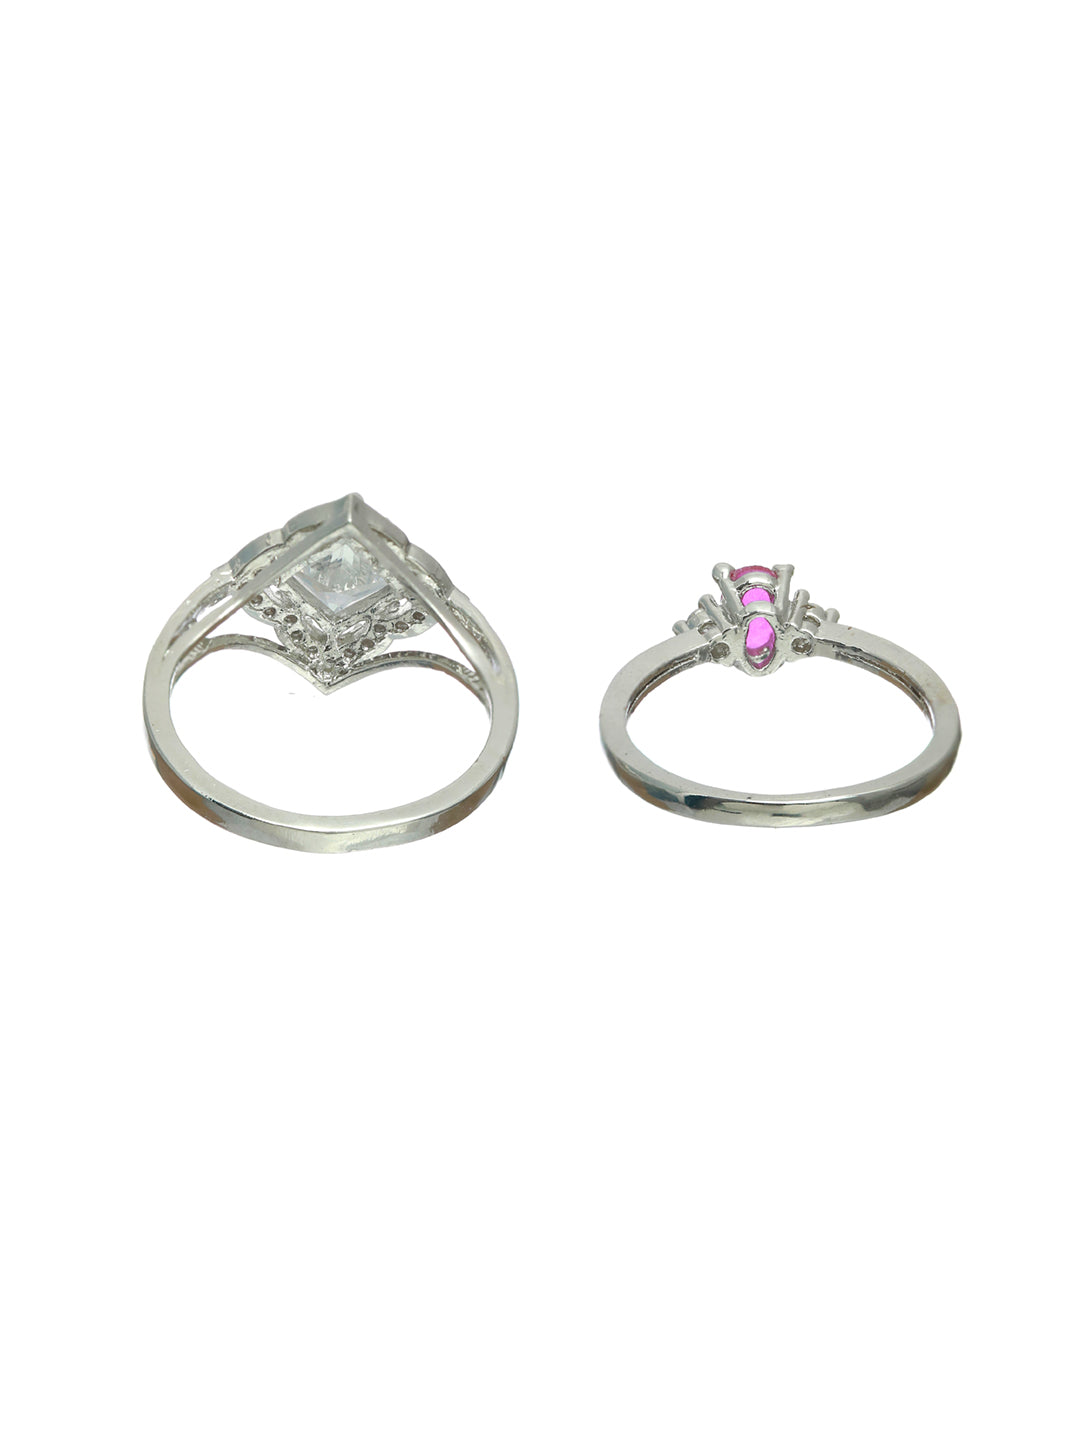 Priyaasi Pink Studded Solitaire Silver Plated Ring Set of 2